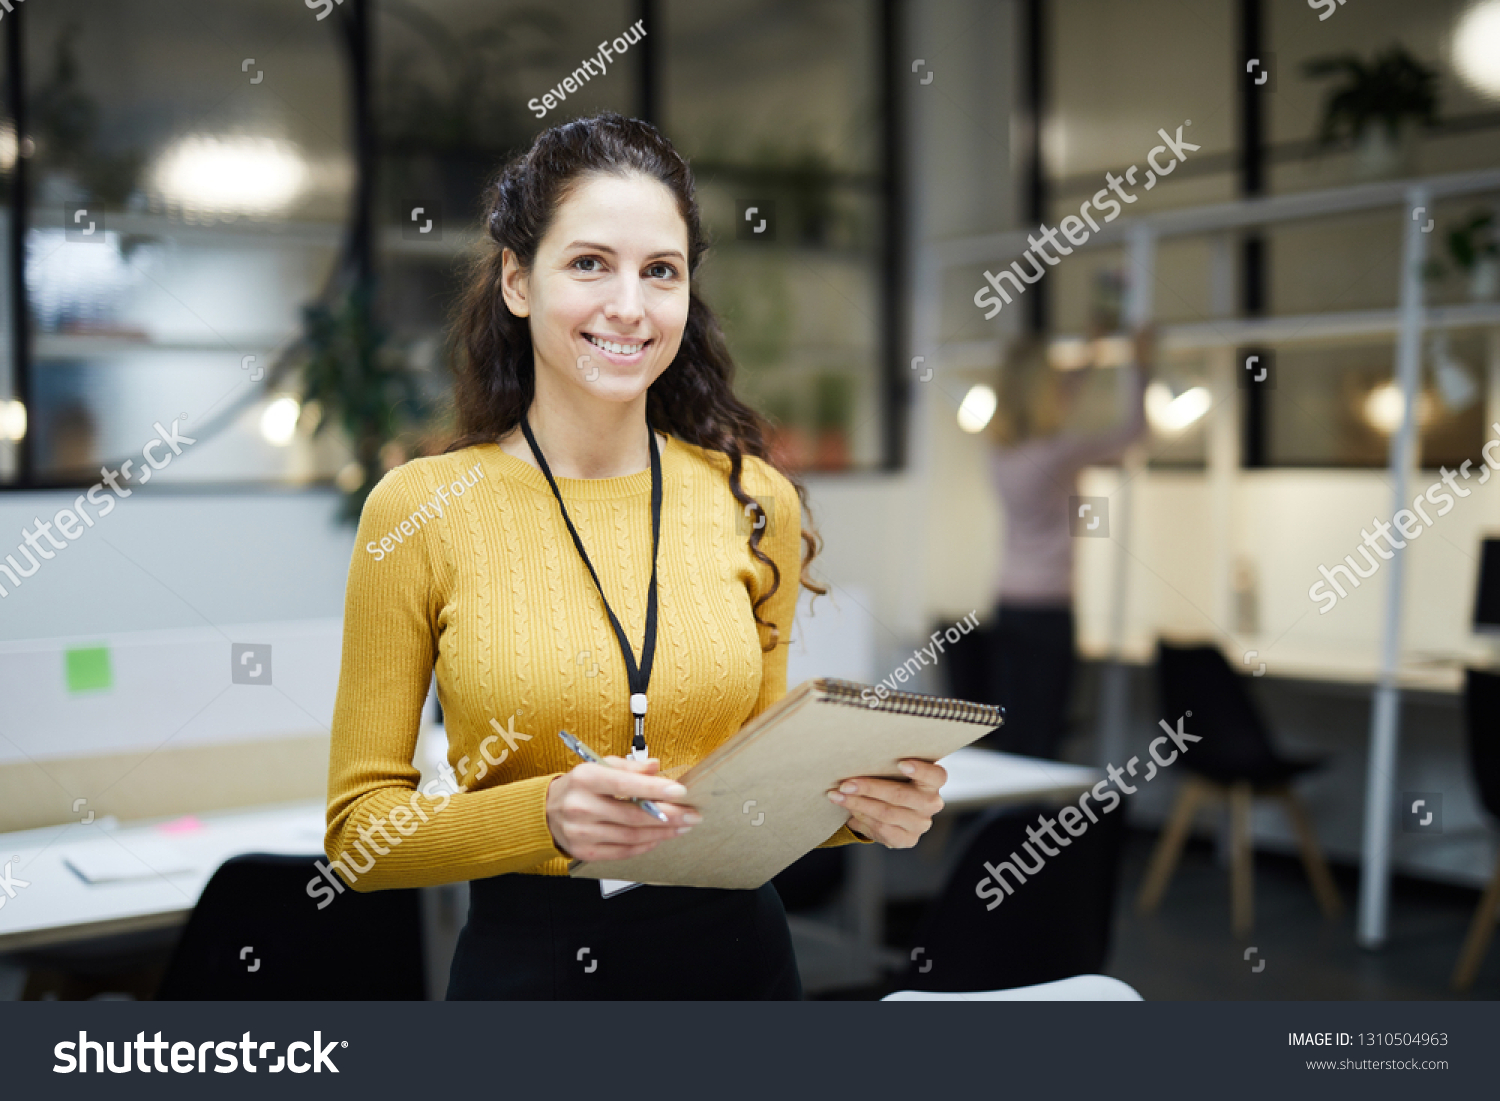 Smiling pretty young lady with badge on neck standing in modern open space office and holding sketchpad while looking at camera #1310504963